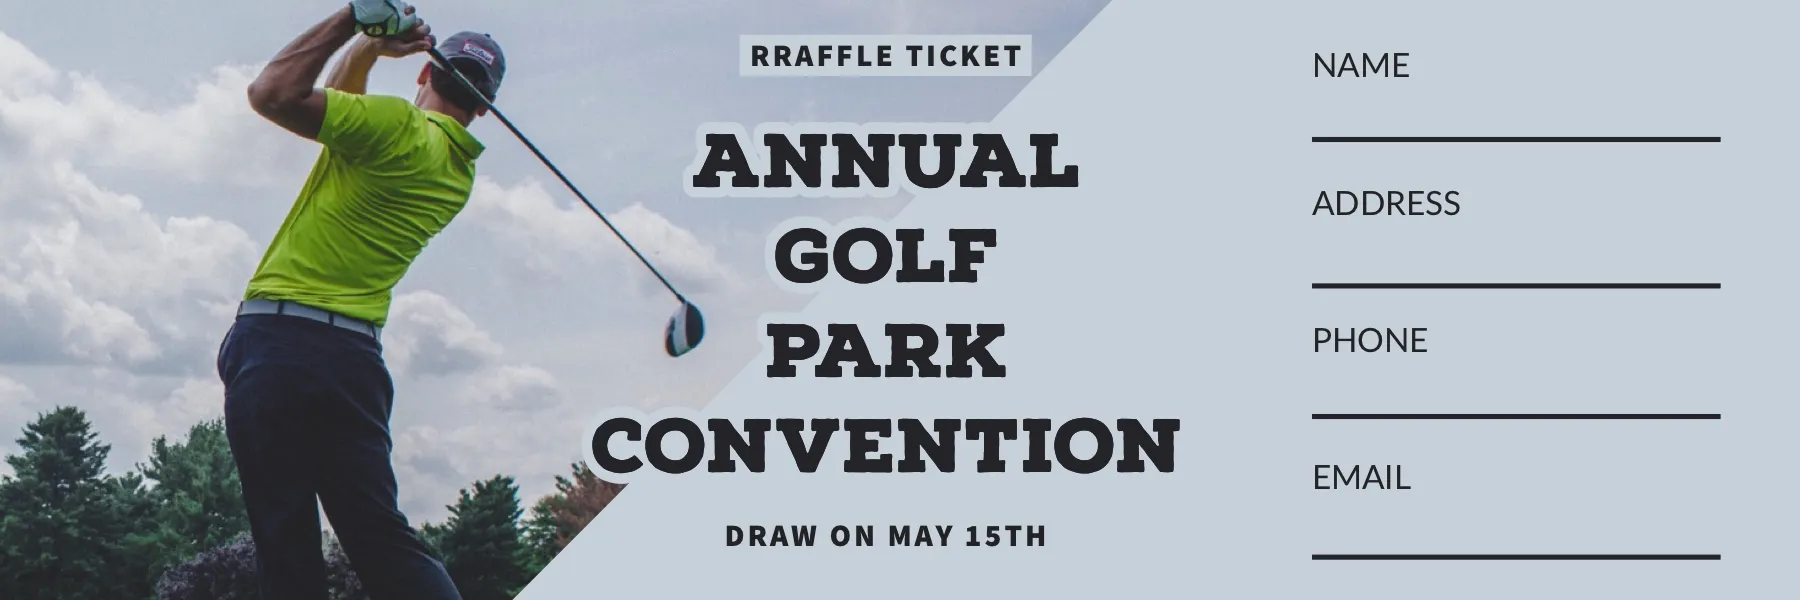 Blue Golf Convention Raffle Ticket with Golf Player Photo